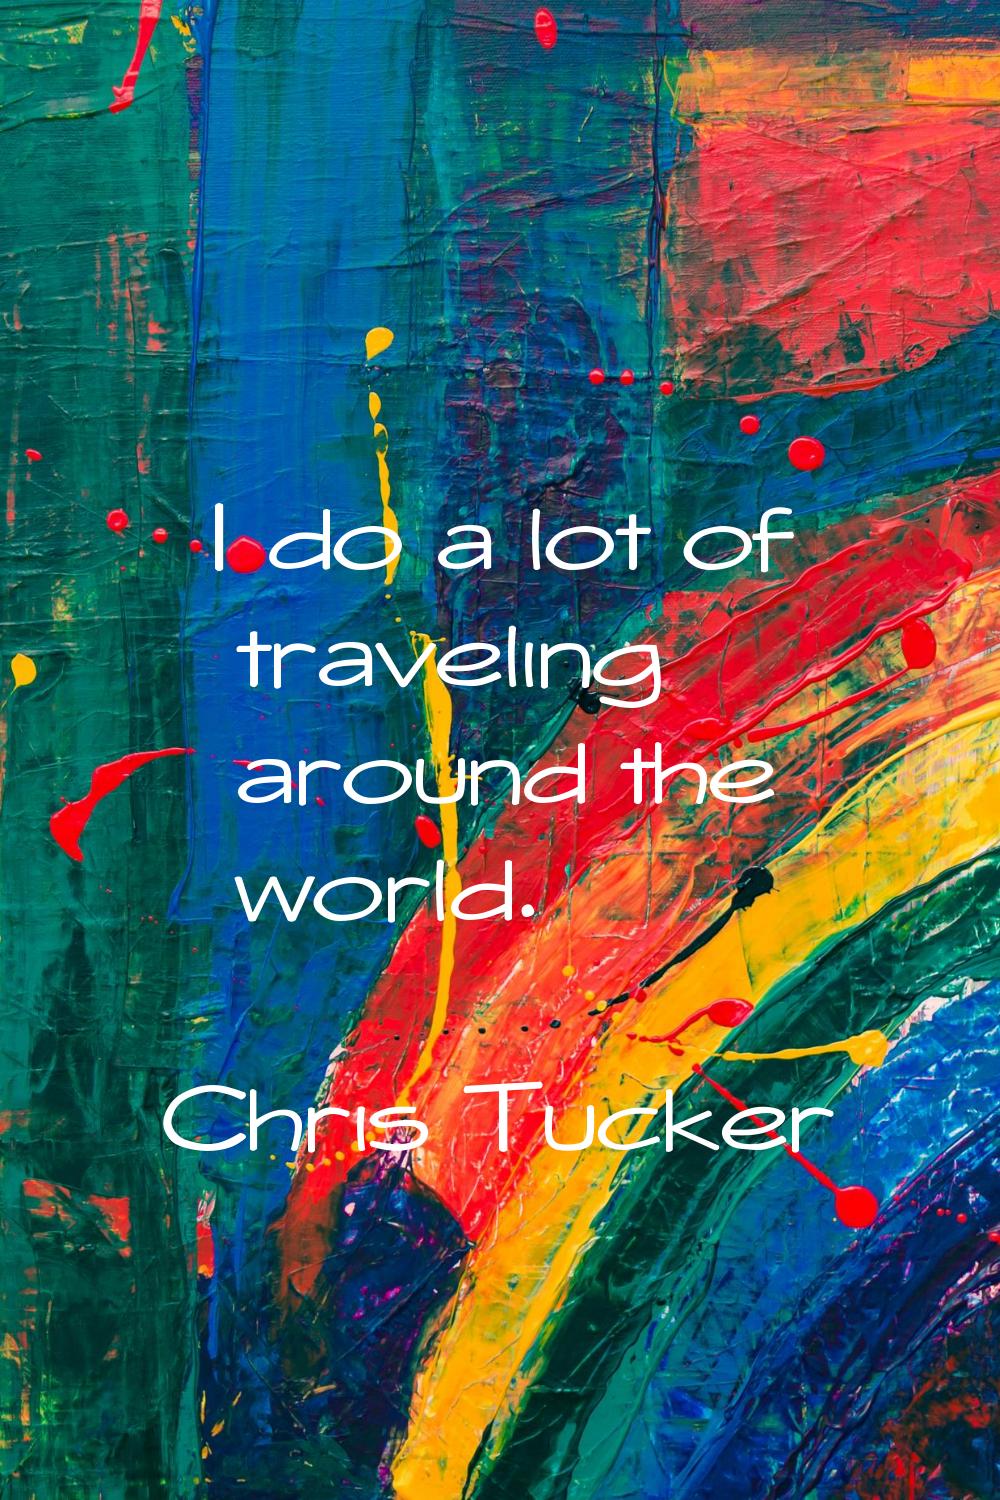 I do a lot of traveling around the world.